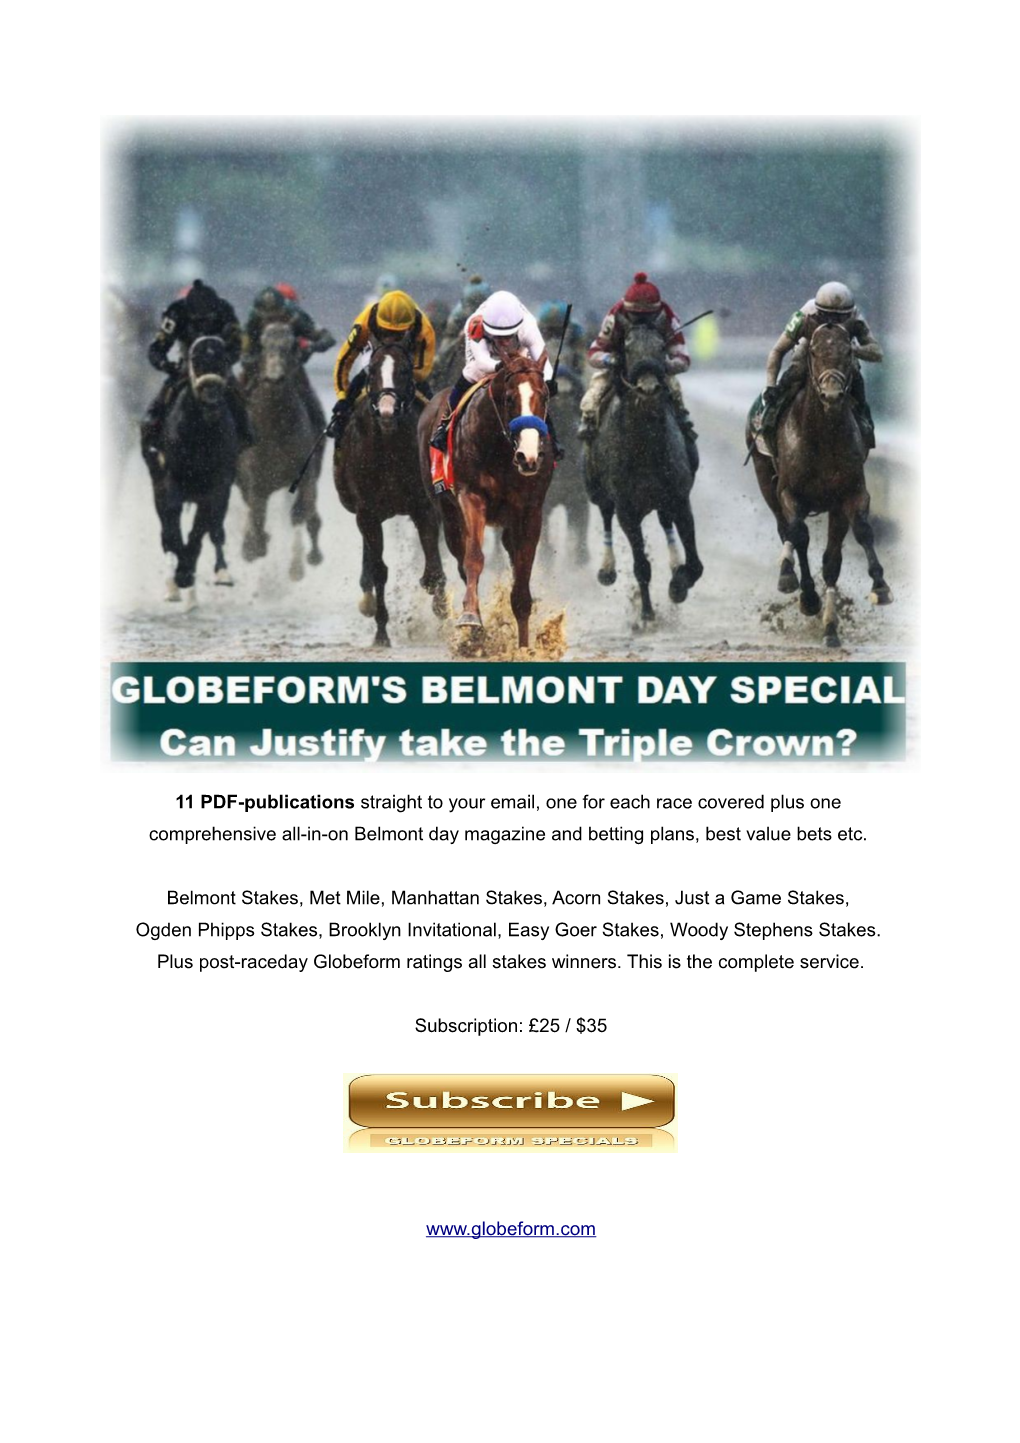 11 PDF-Publications Straight to Your Email, One for Each Race Covered Plus One Comprehensive All-In-On Belmont Day Magazine and Betting Plans, Best Value Bets Etc